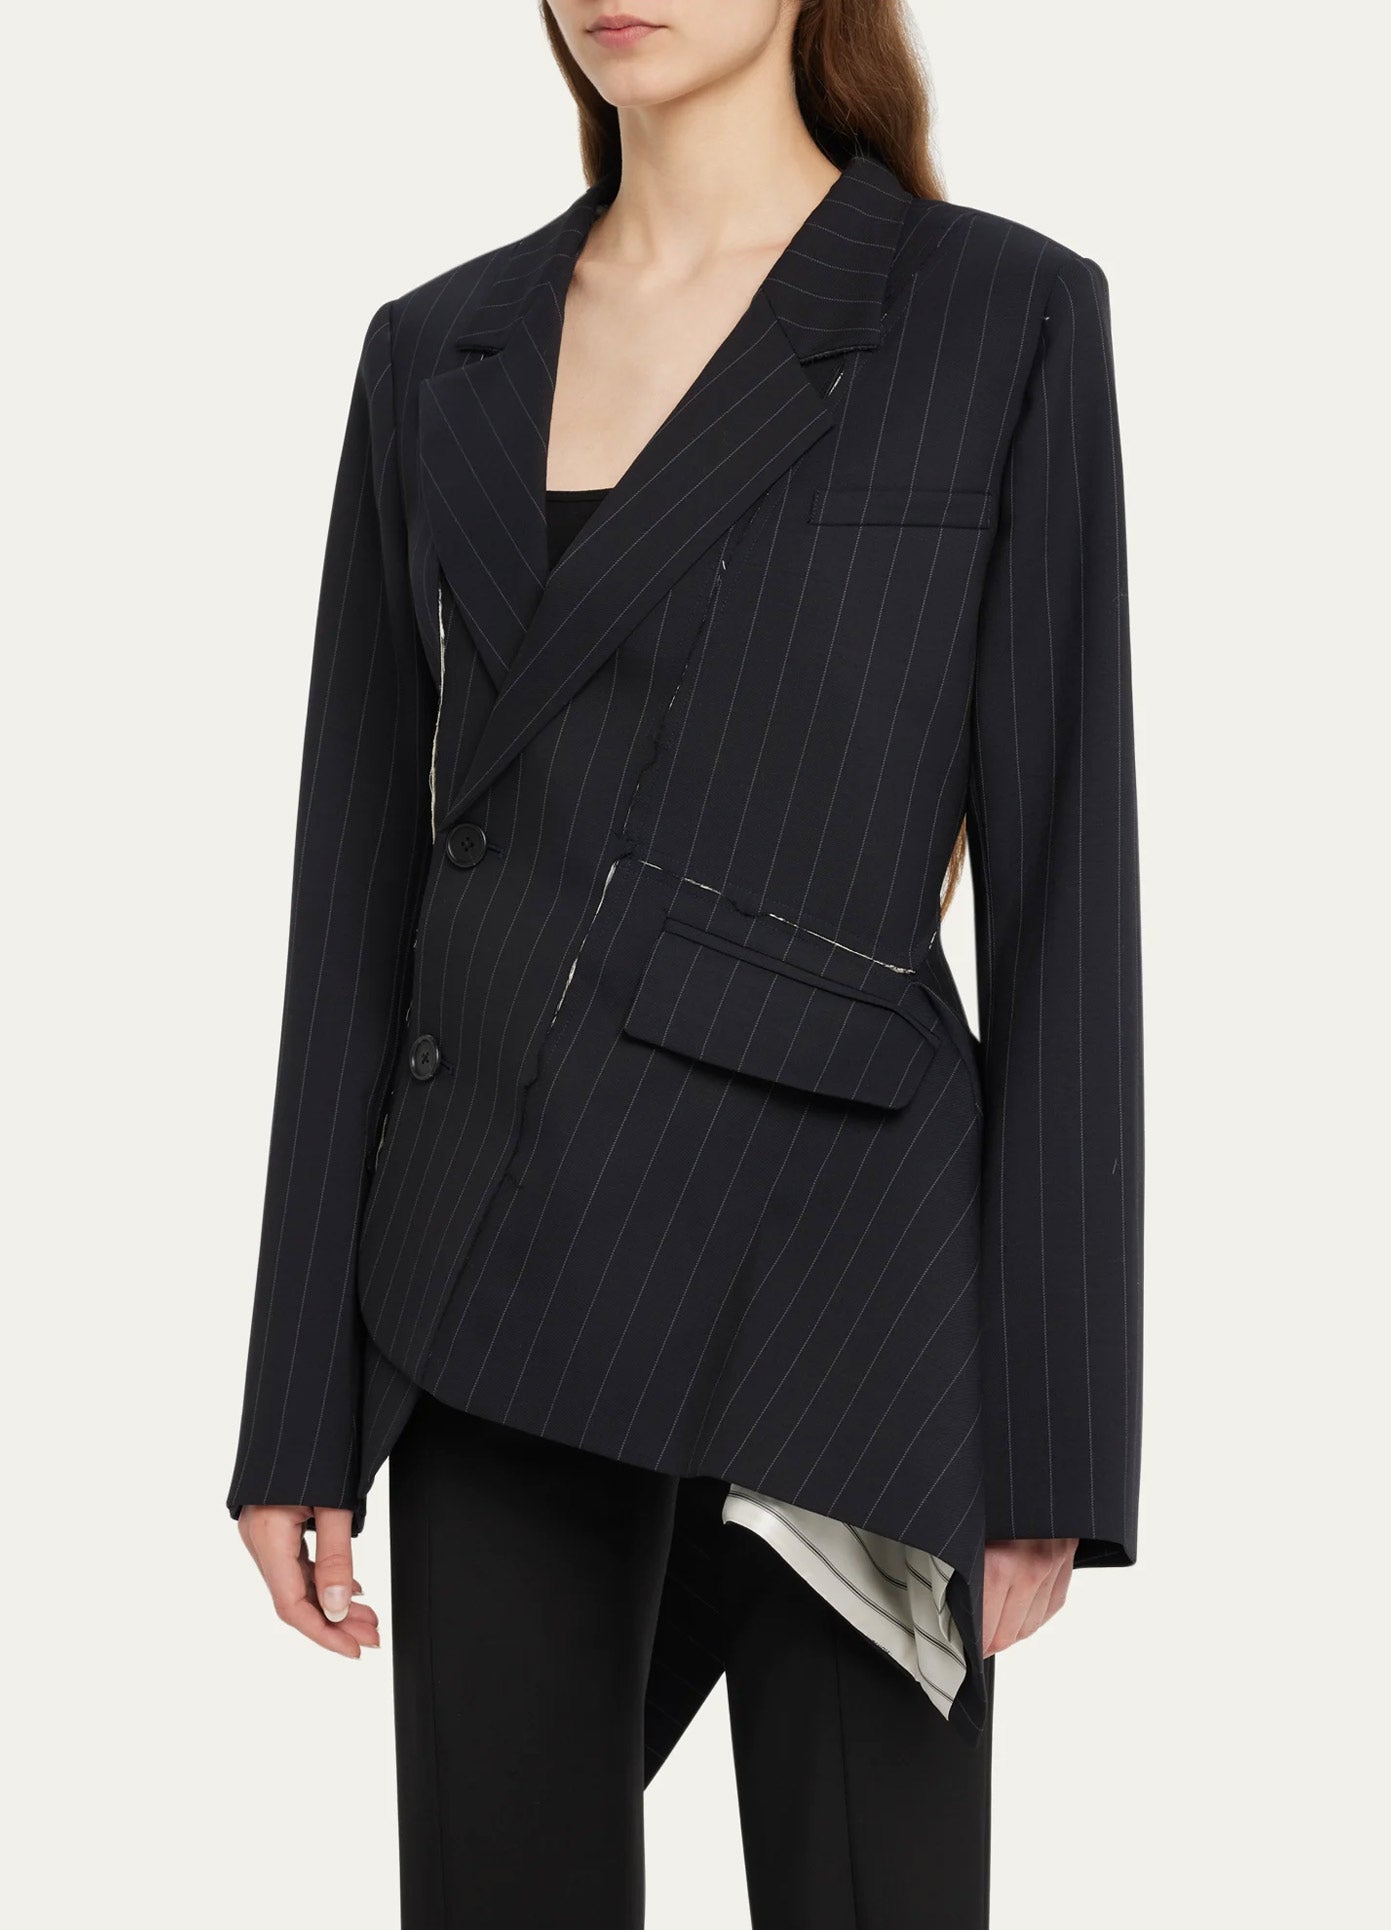 MONSE Deconstructed Slashed Jacket in Pinstripe Midnight on model side view